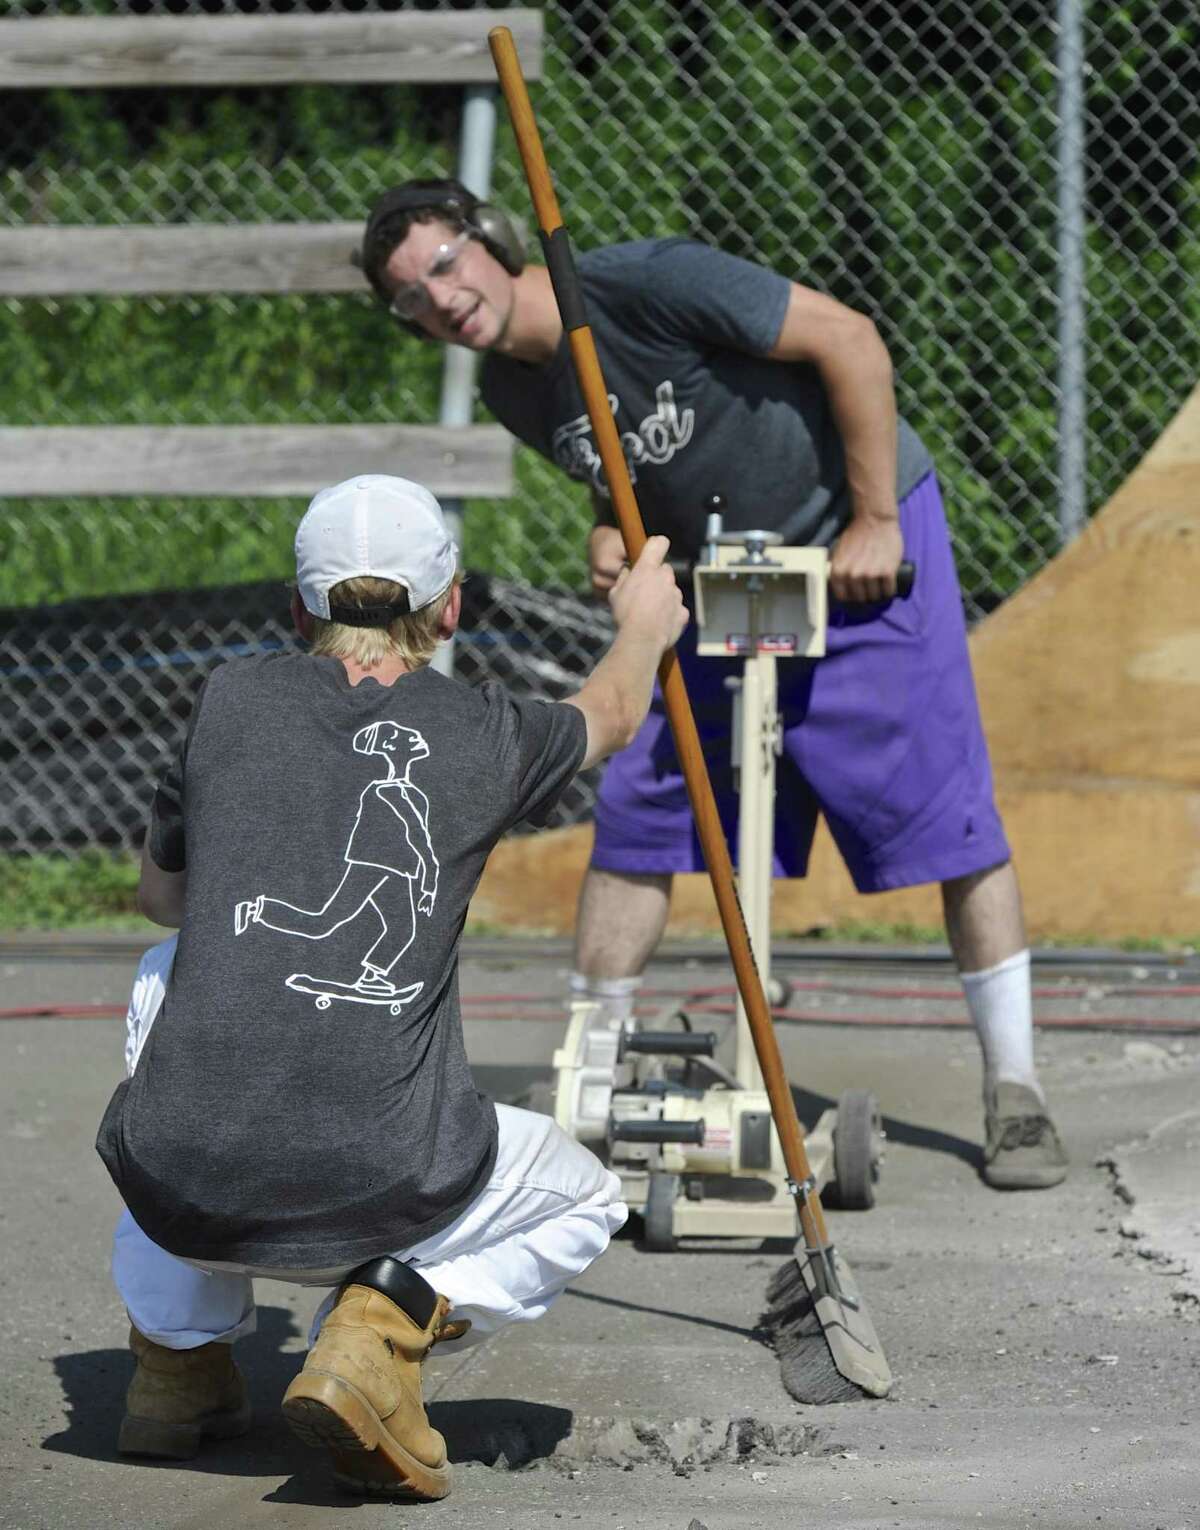 Russell Parker, of Sherman, gets help lining up a saw from Tristan Cornelis, of New Milford, while working to bring the New Milford Skate Park up to code. Thursday, August 3, 2017, in New Milford, Conn.